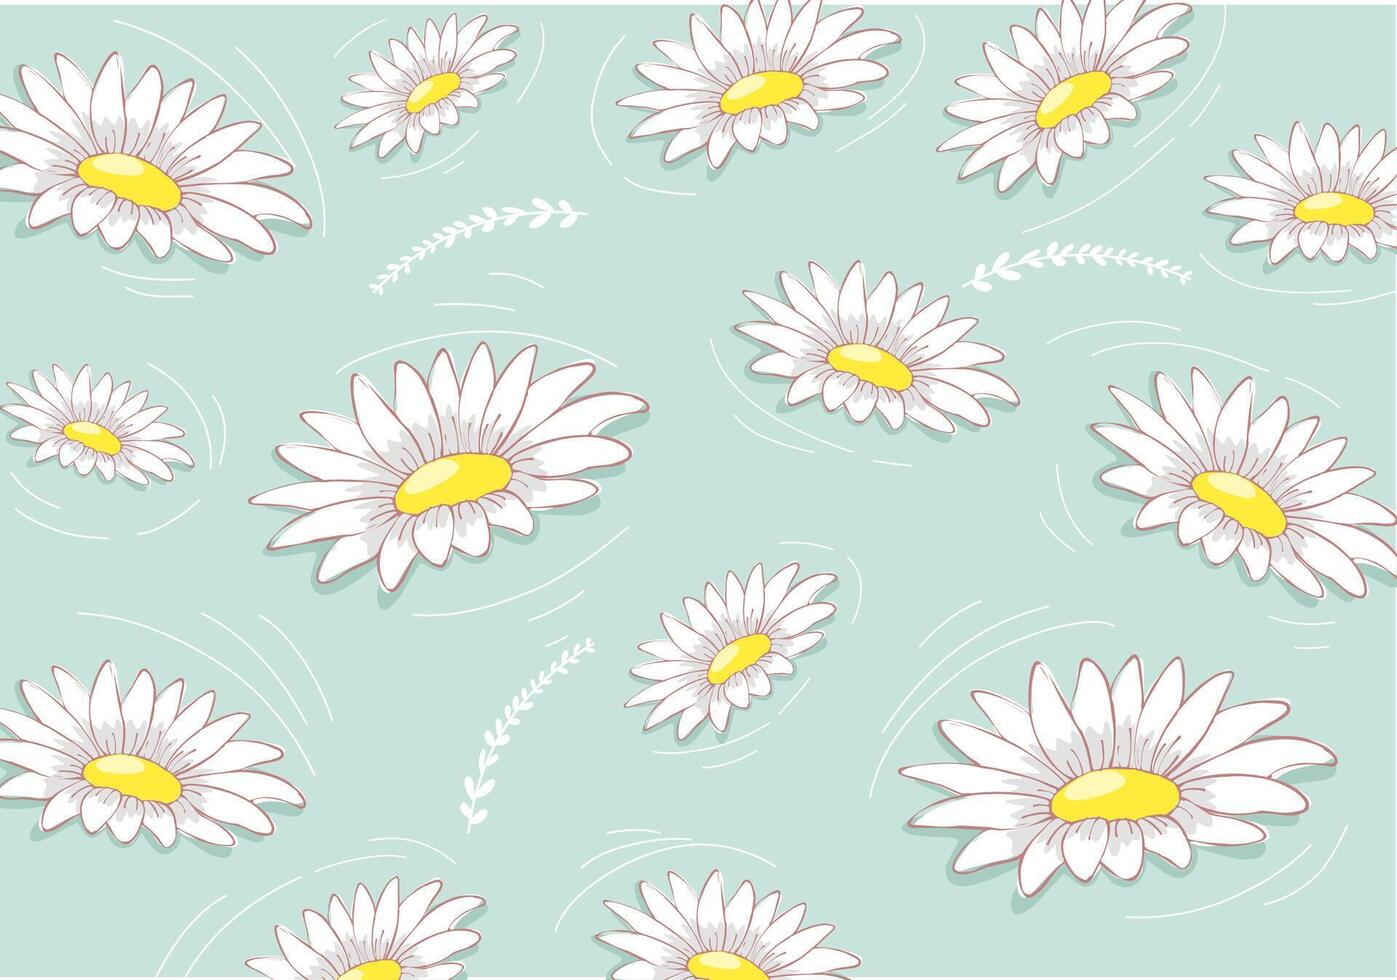 blue background with white daisy flower motif vector